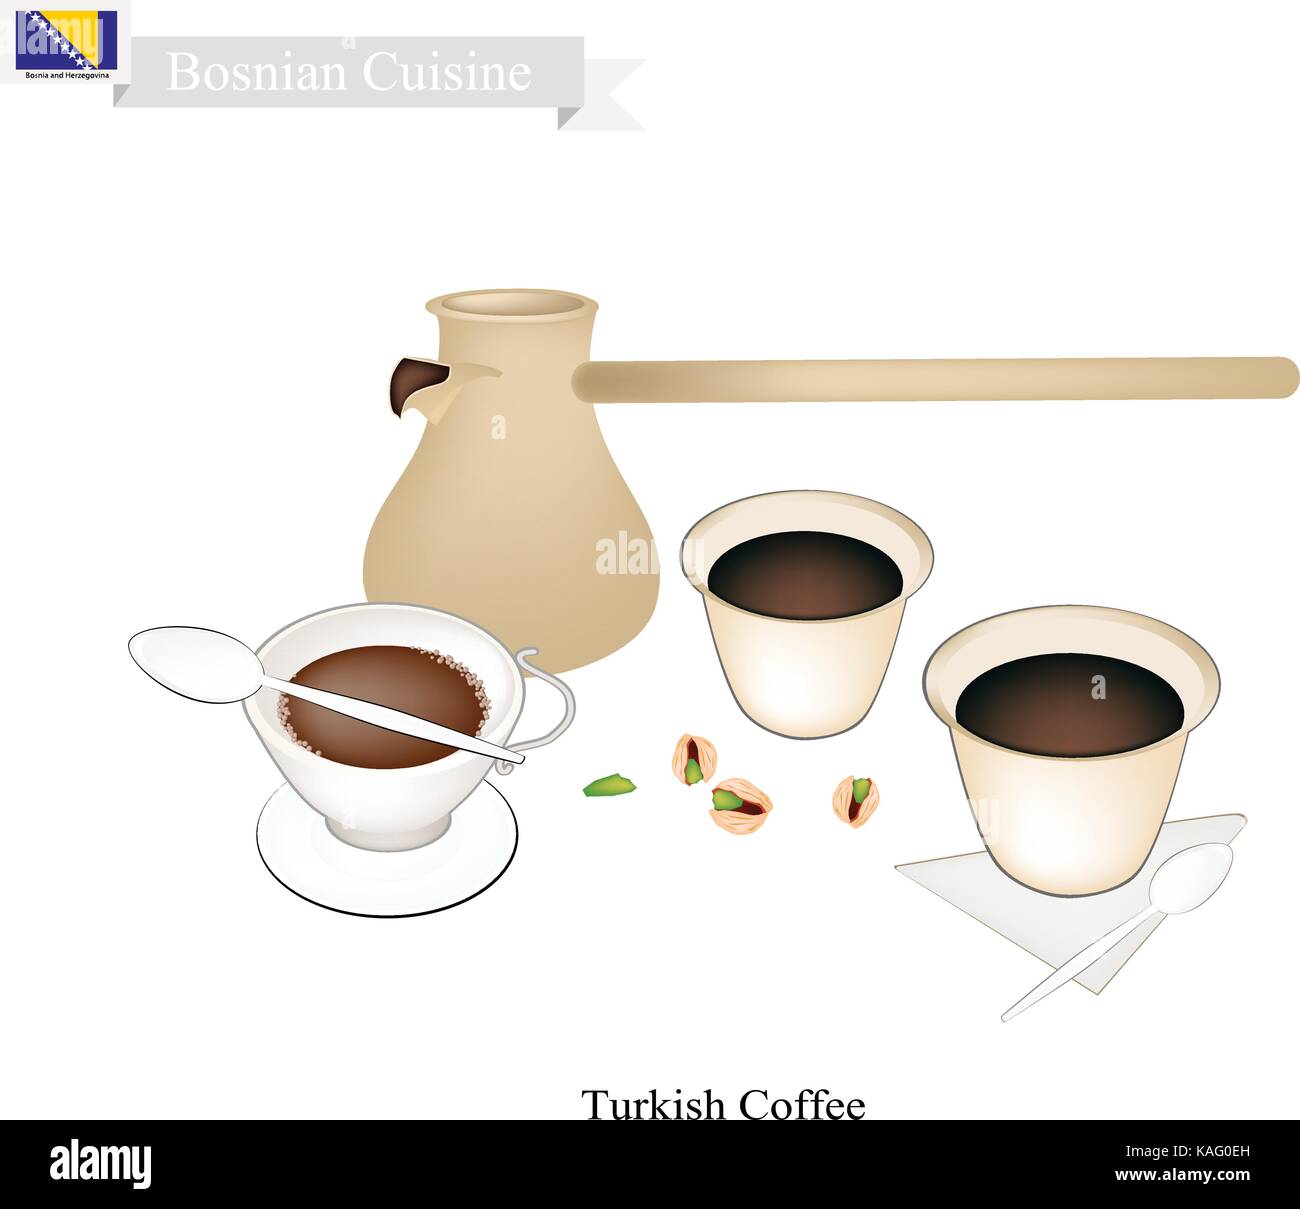 Bosnian Cuisine, Turkish Coffee with Cezve or Turkish Coffee Pot. One of The Popular Beverage in Bosnia and Herzegovina. Stock Vector